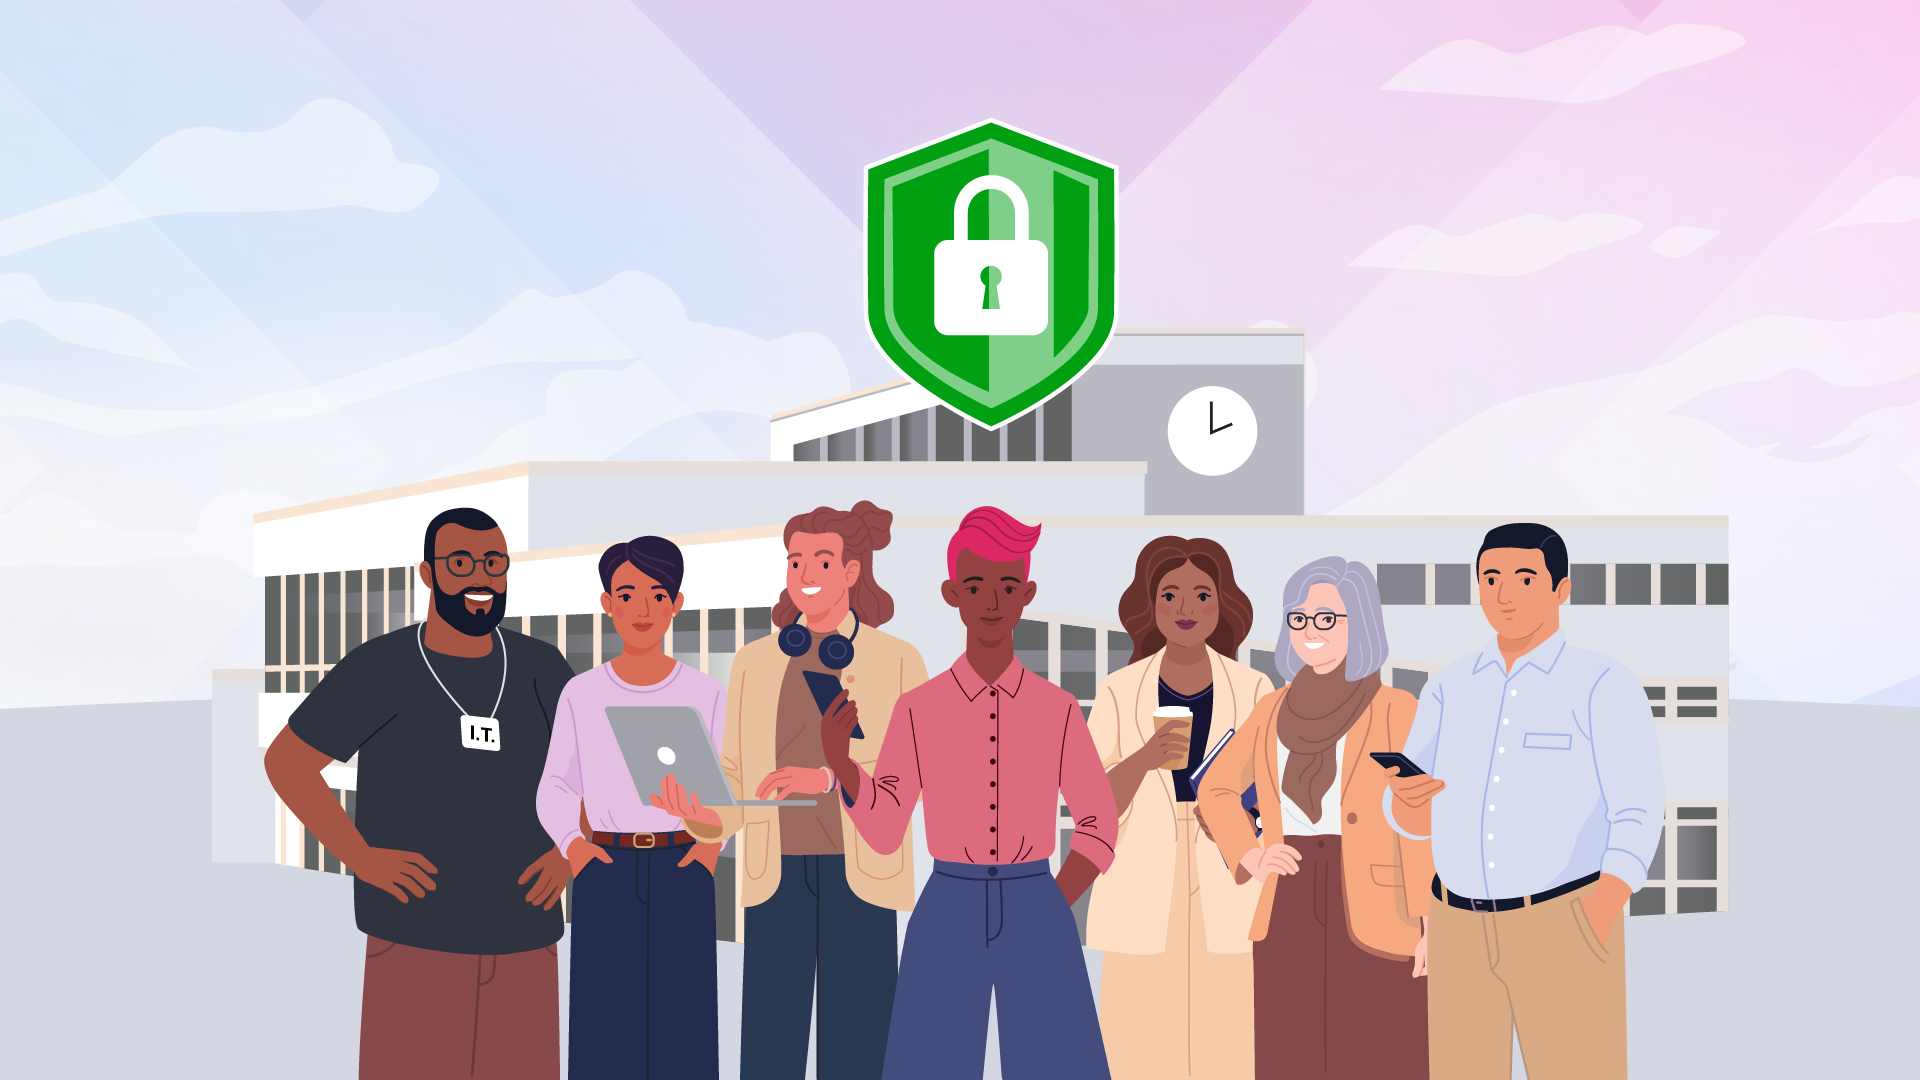 Animated image of people smiling on their laptops and phones with a security padlock above their heads